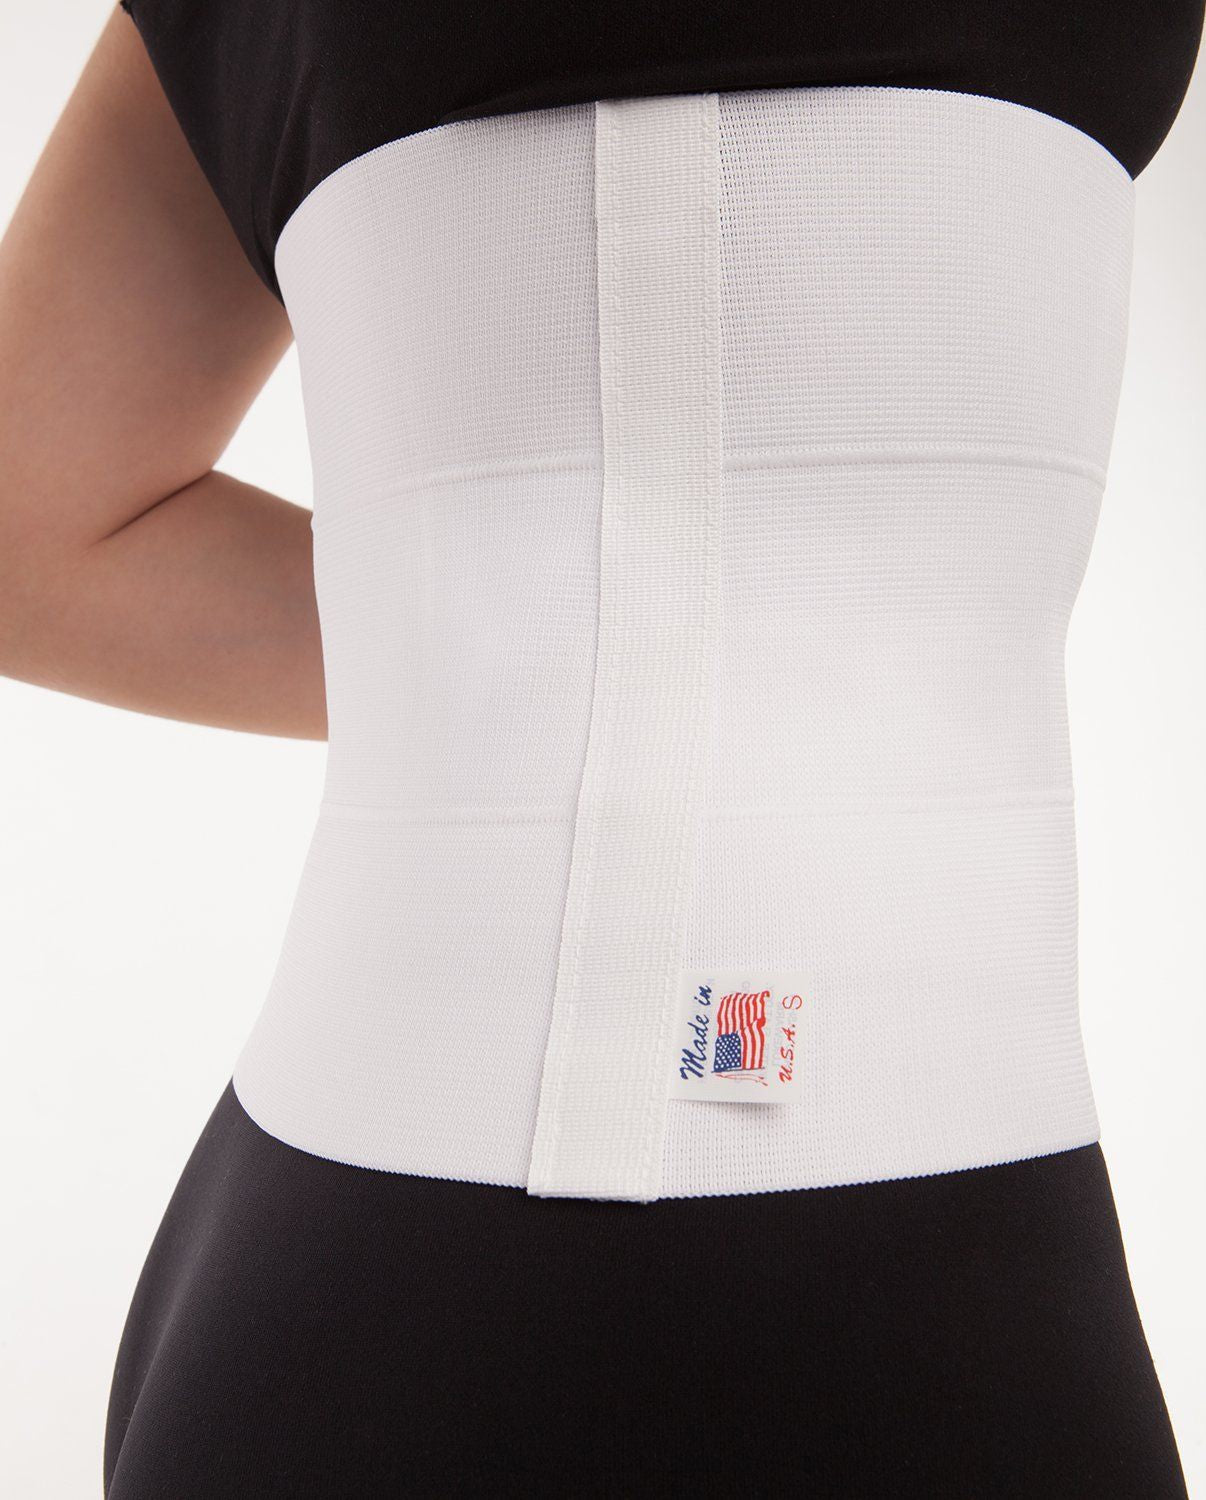 How to put on ITA-MED Abdominal Support Binder?  Abdominal Binder with  Breathable Elastic 